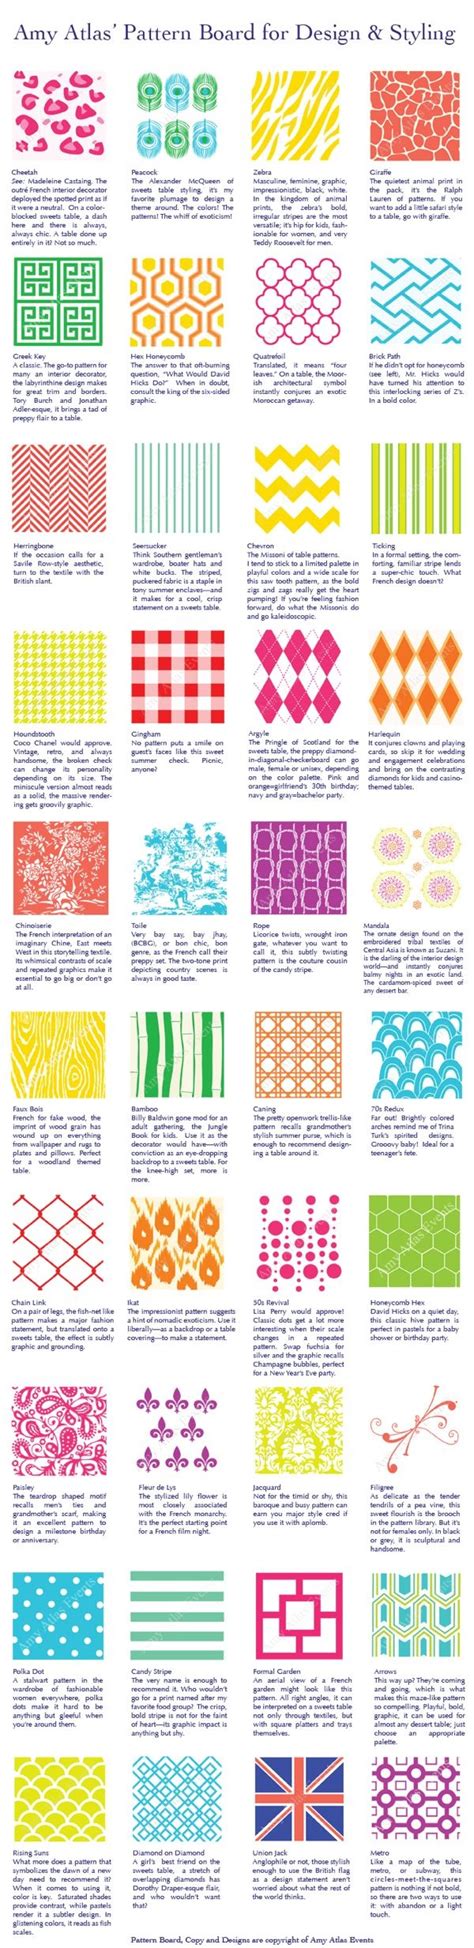 30 Best Fabric Pattern Names Images On Pinterest Fabric Patterns